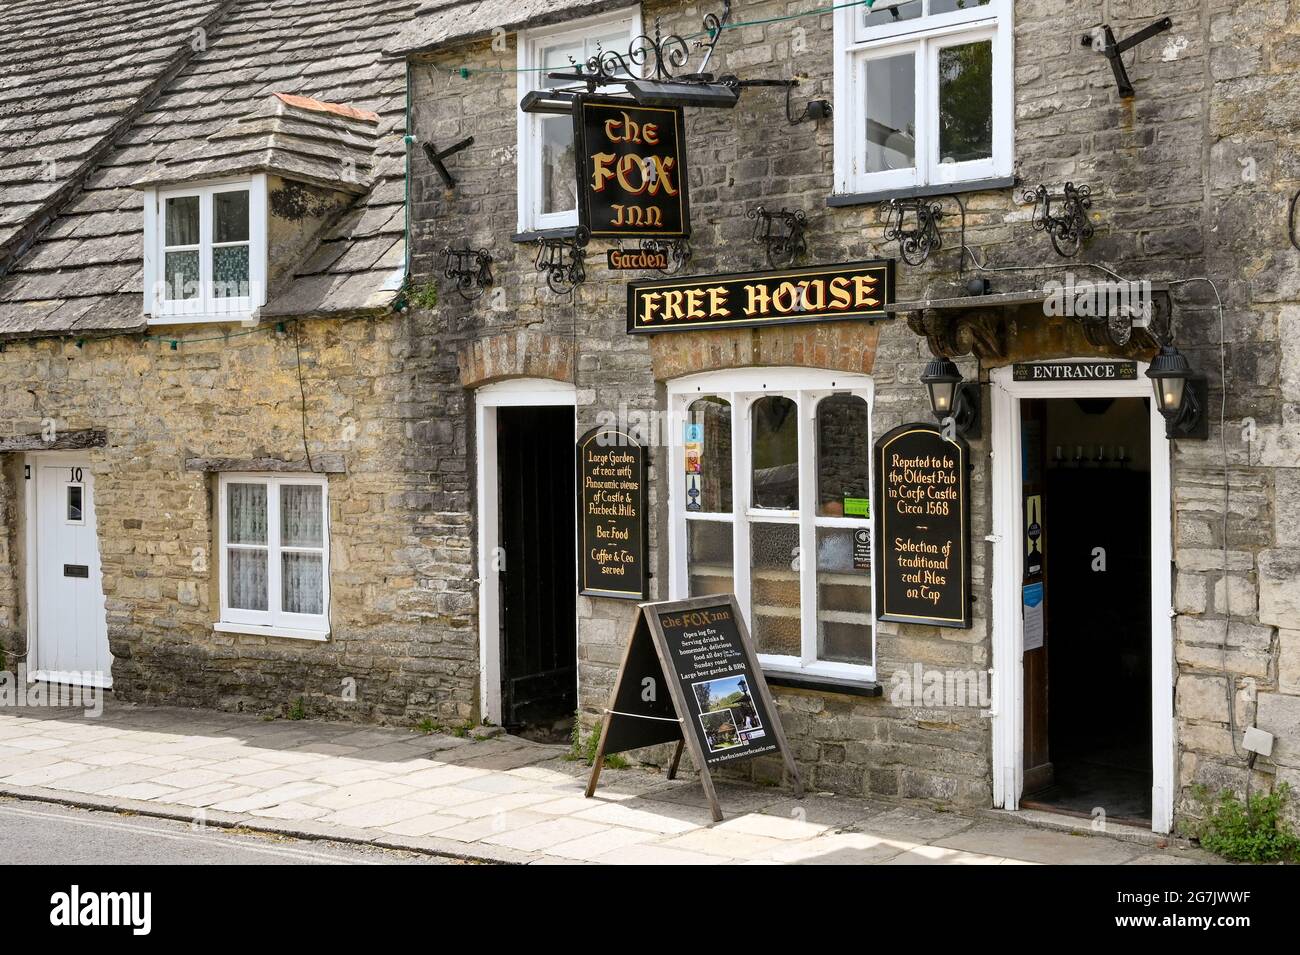 Corfe Castle, Dorset, England - June 2021: Entrance to The Fox Inn, a small traditional pub in one of the streets of the village of Corfe Castle.. Stock Photo